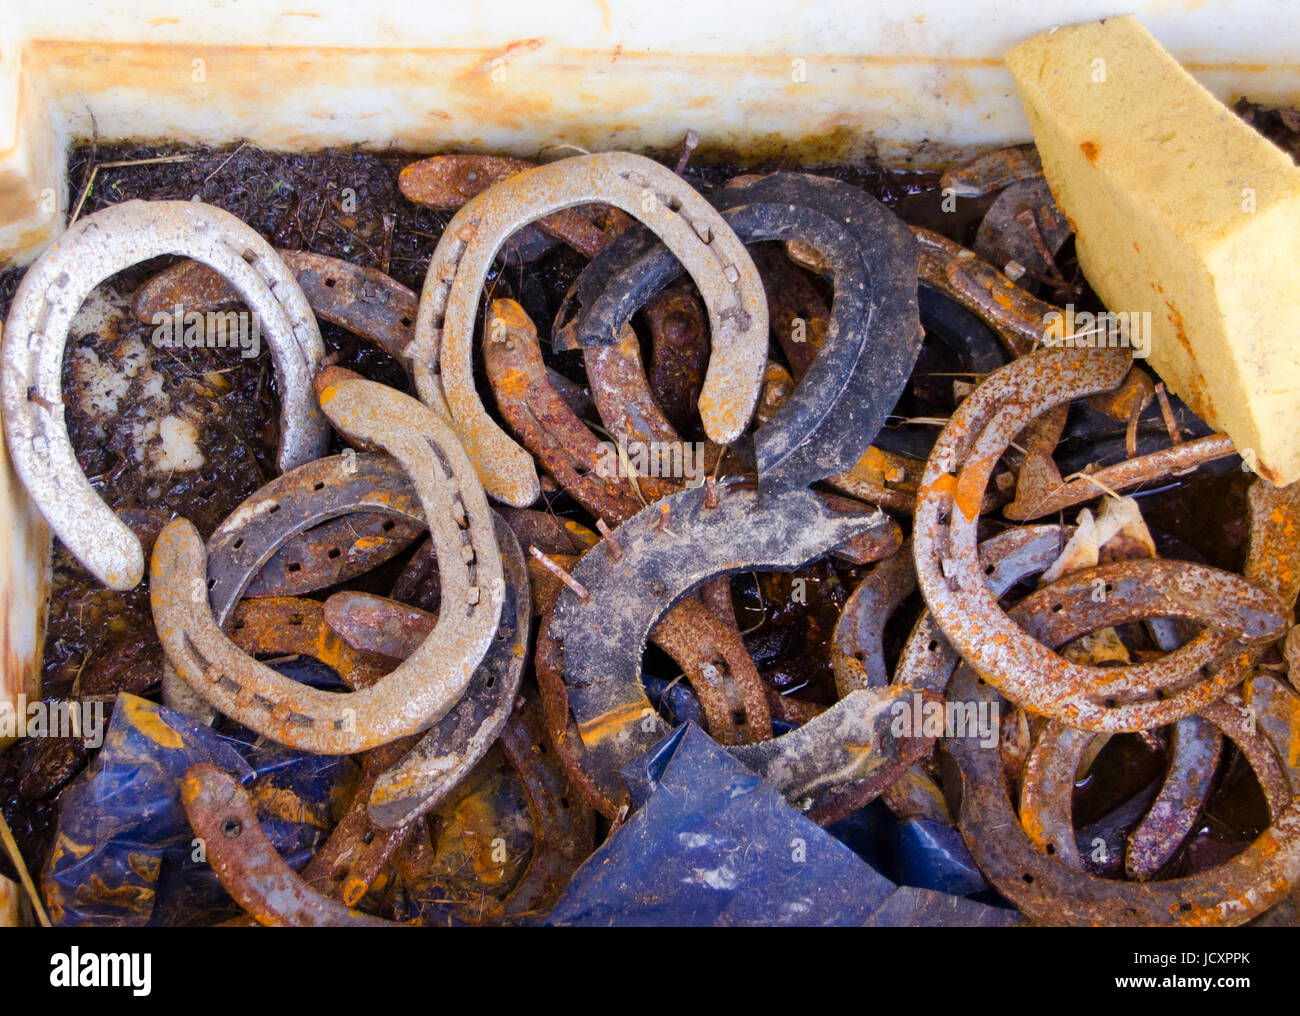 Rusty old horse shoes in a dirty box Stock Photo